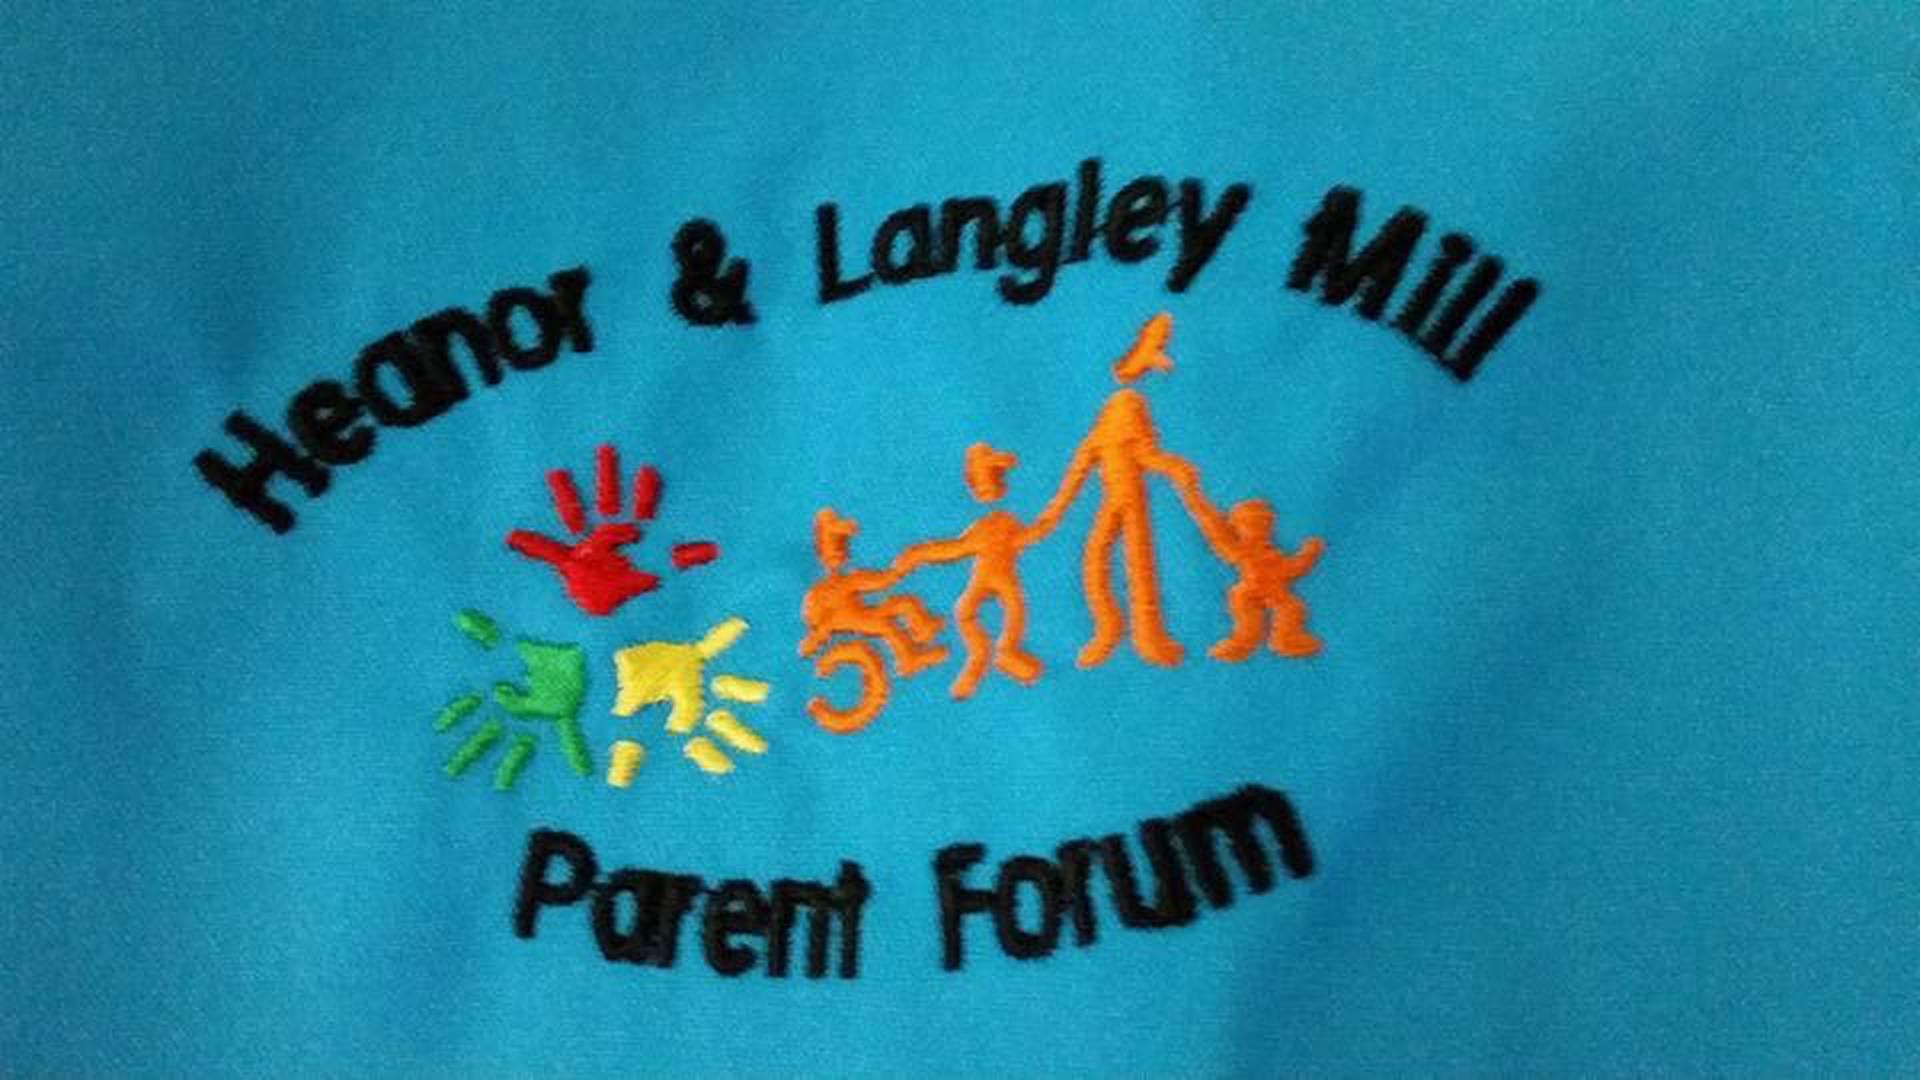 Heanor and Langley Mill Children’s Centre Parents Forum photo